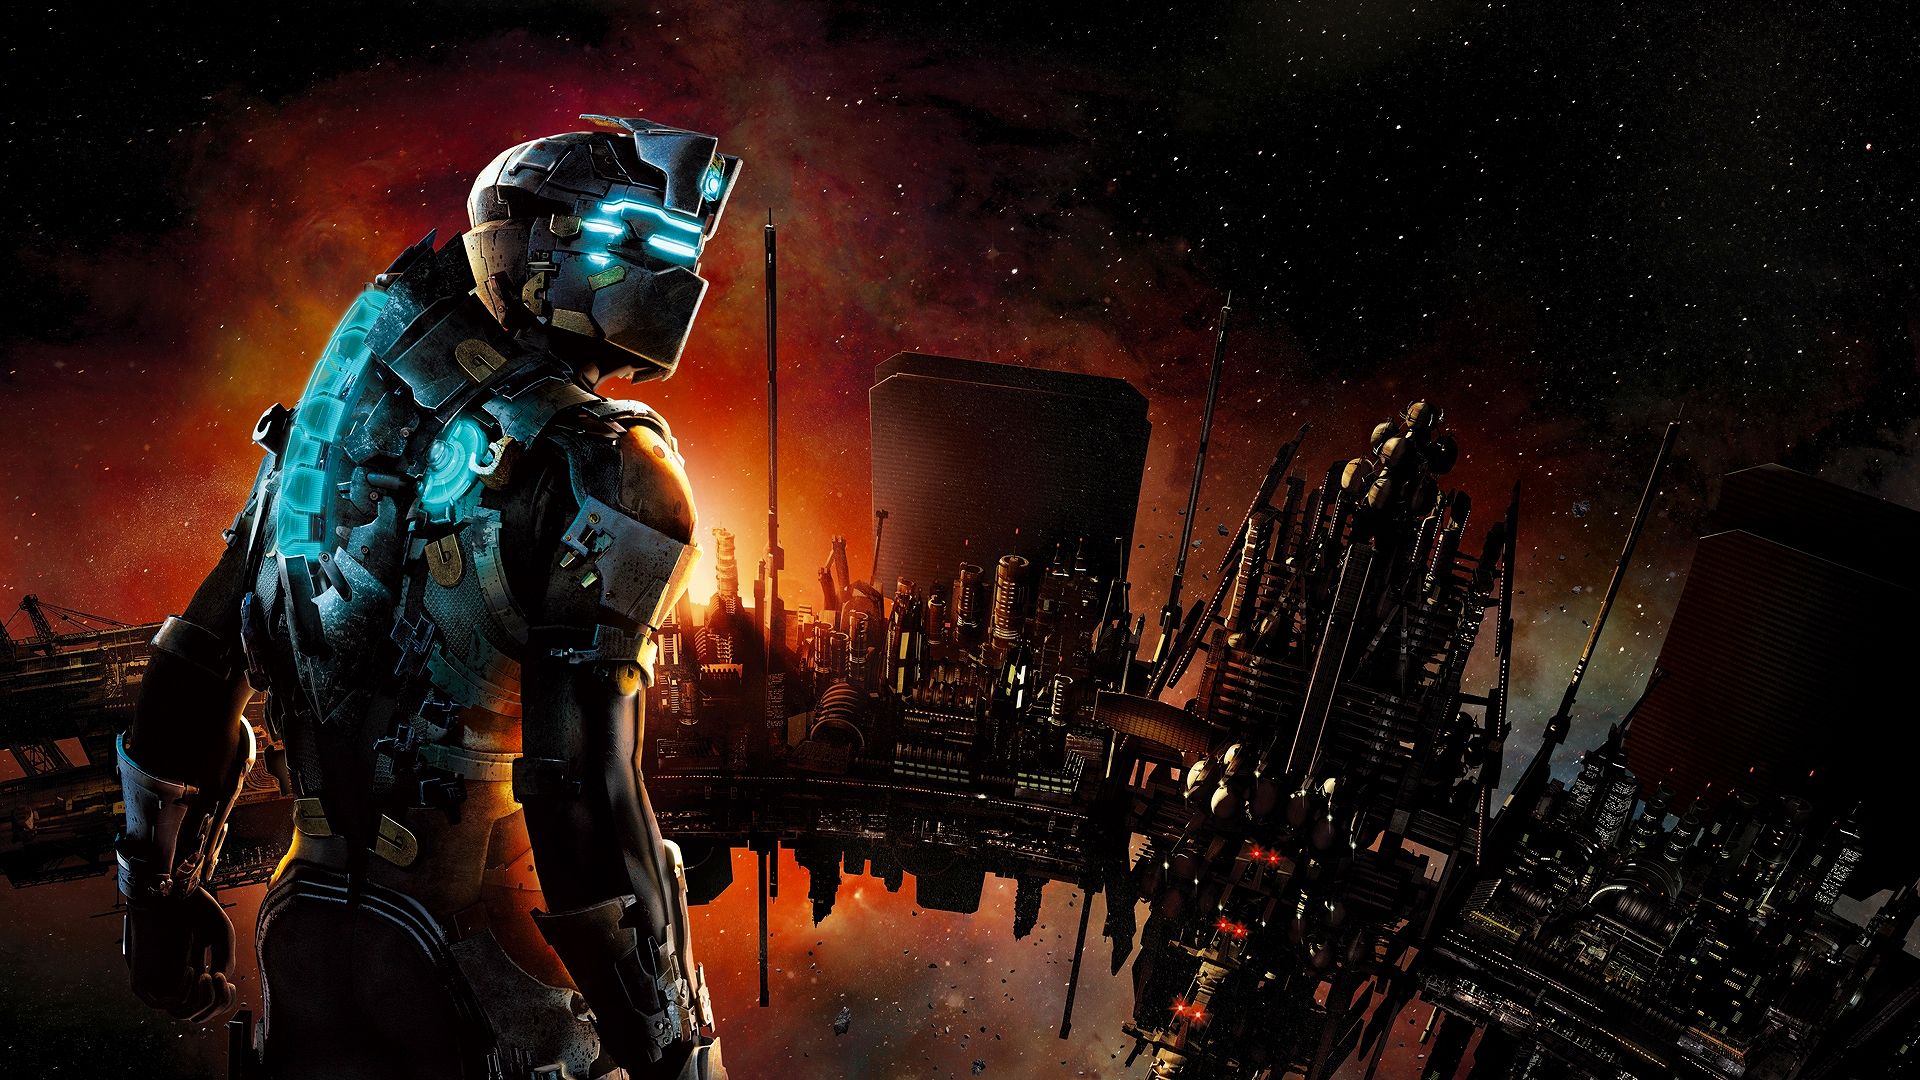 Pc ゲーム Dead Space 2 11年版 日本語化とゲームプレイ最適化メモ Awgs Foundry